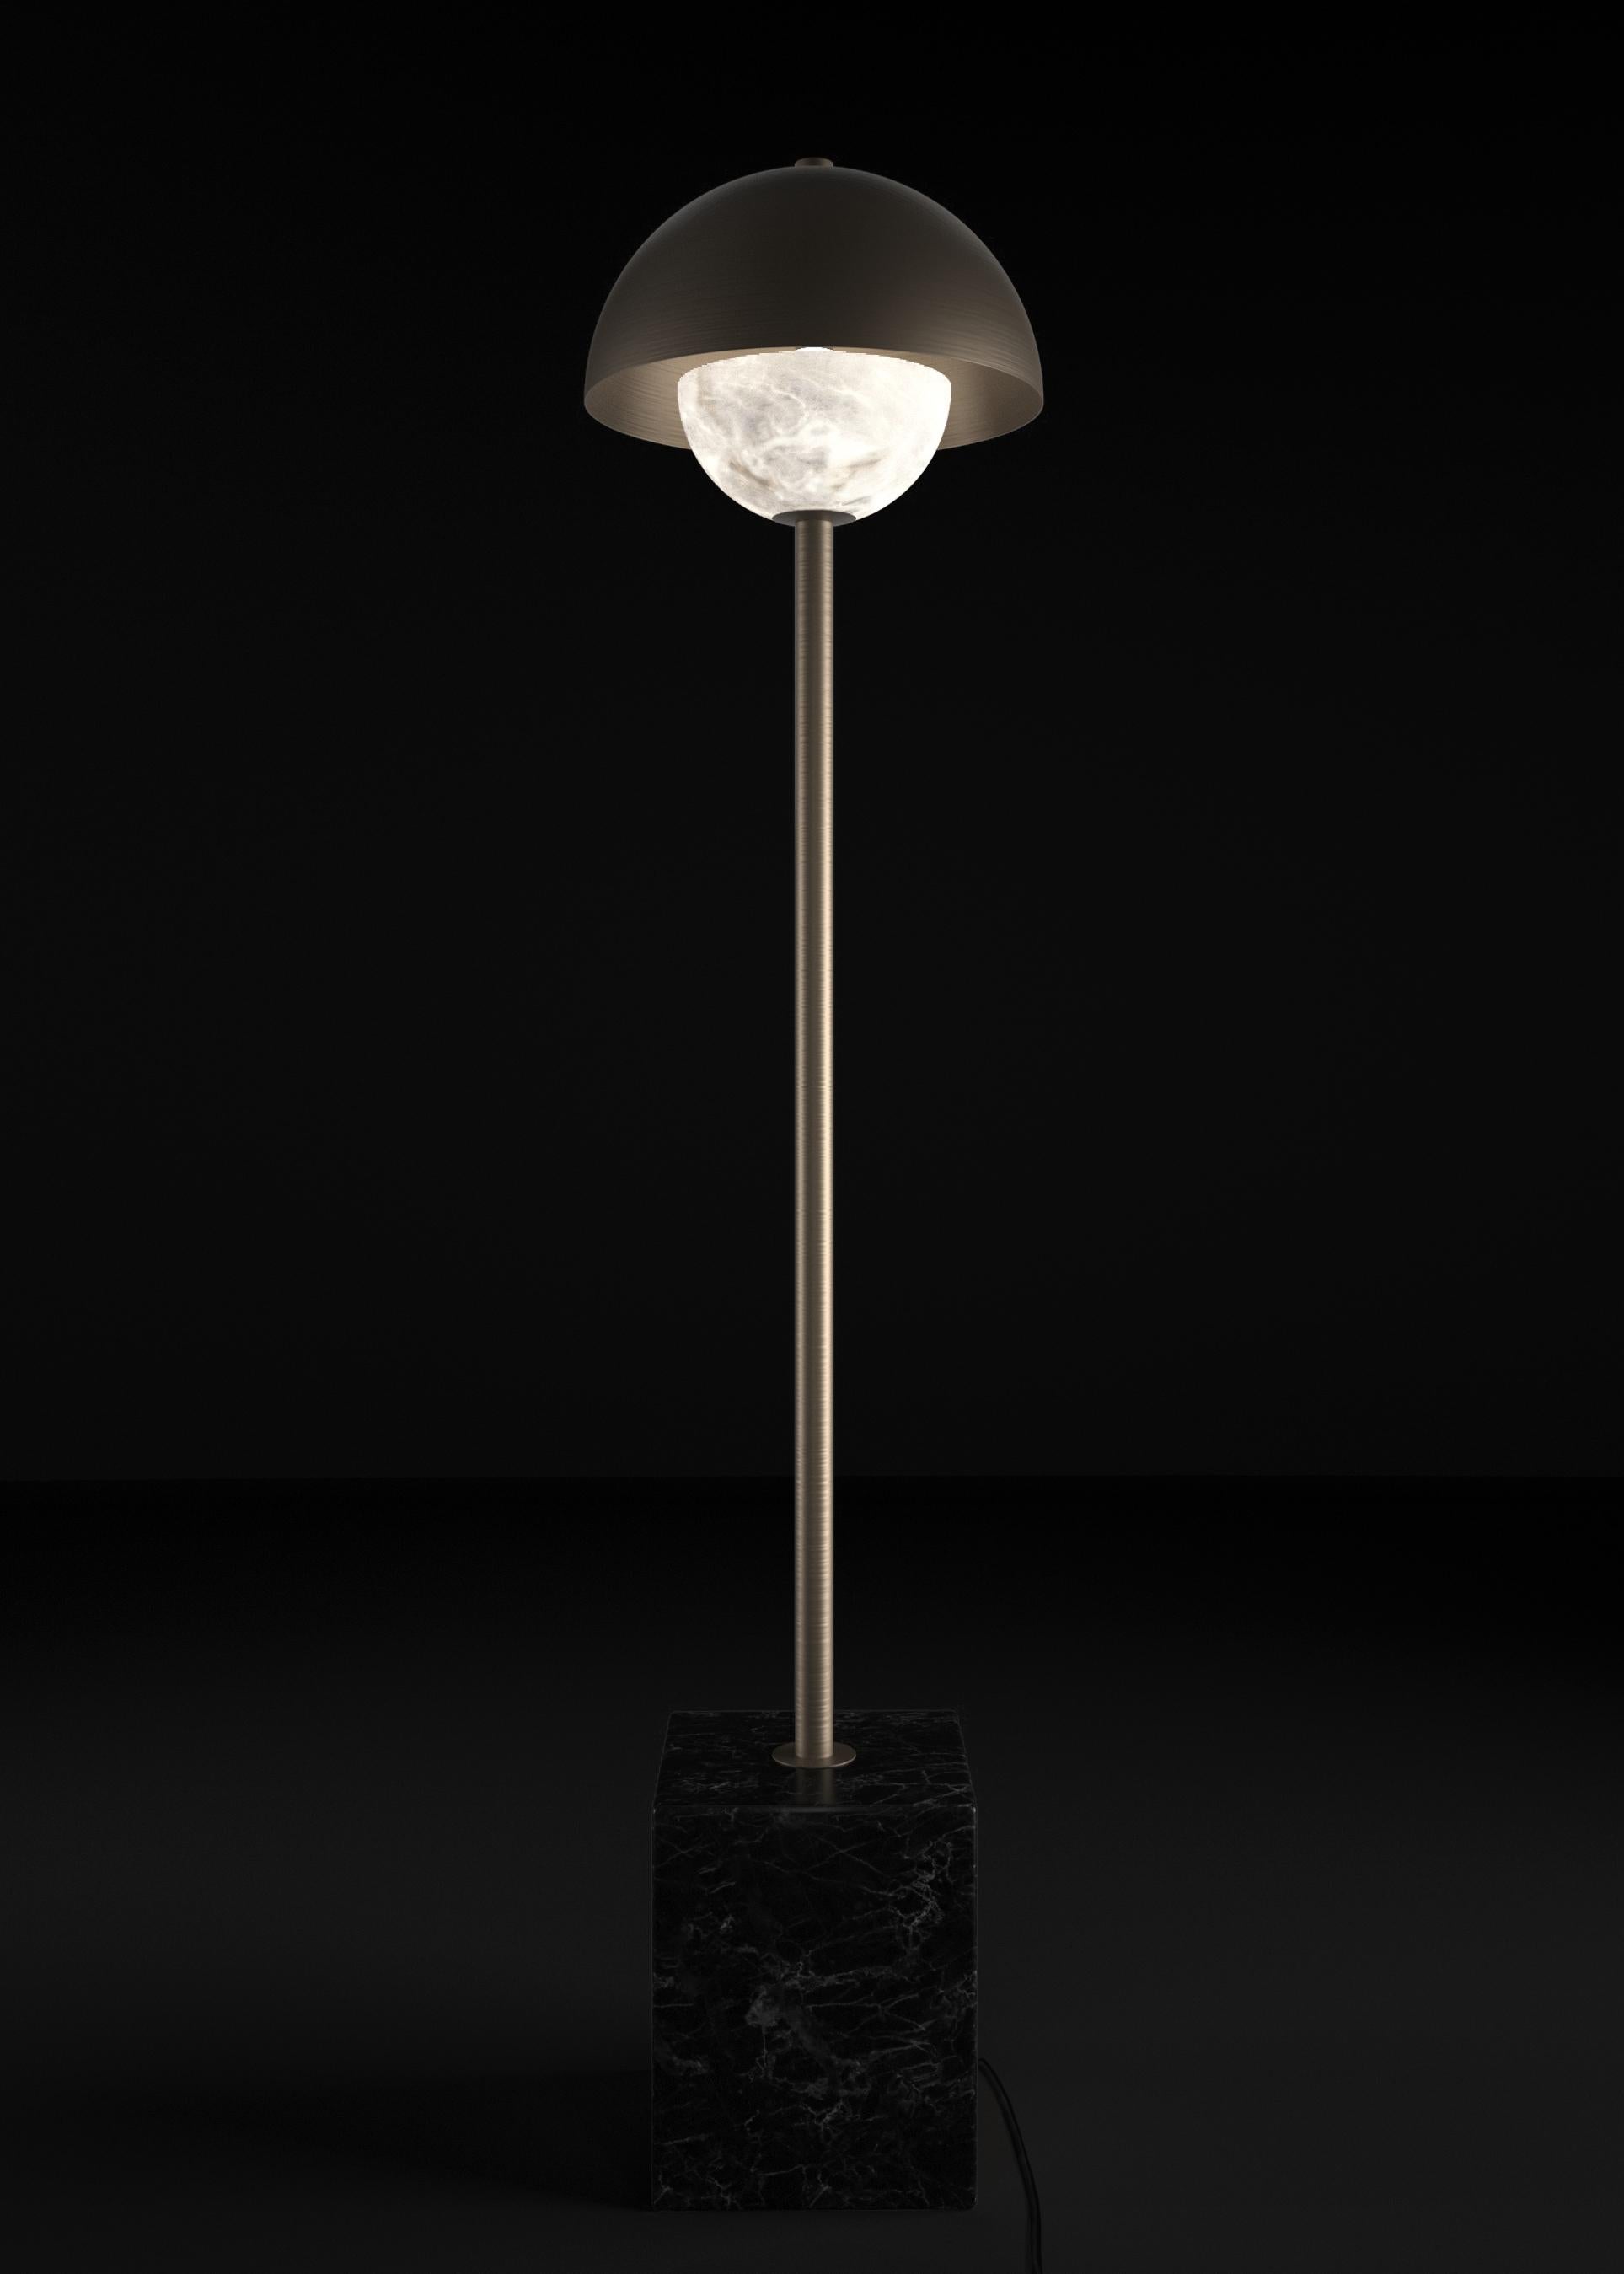 Apollo Brushed Burnished Metal Floor Lamp by Alabastro Italiano
Dimensions: D 30 x W 30 x H 130 cm.
Materials: White alabaster, Nero Marquinia marble, black silk cables and metal.

Available in different finishes: Shiny Silver, Bronze, Brushed